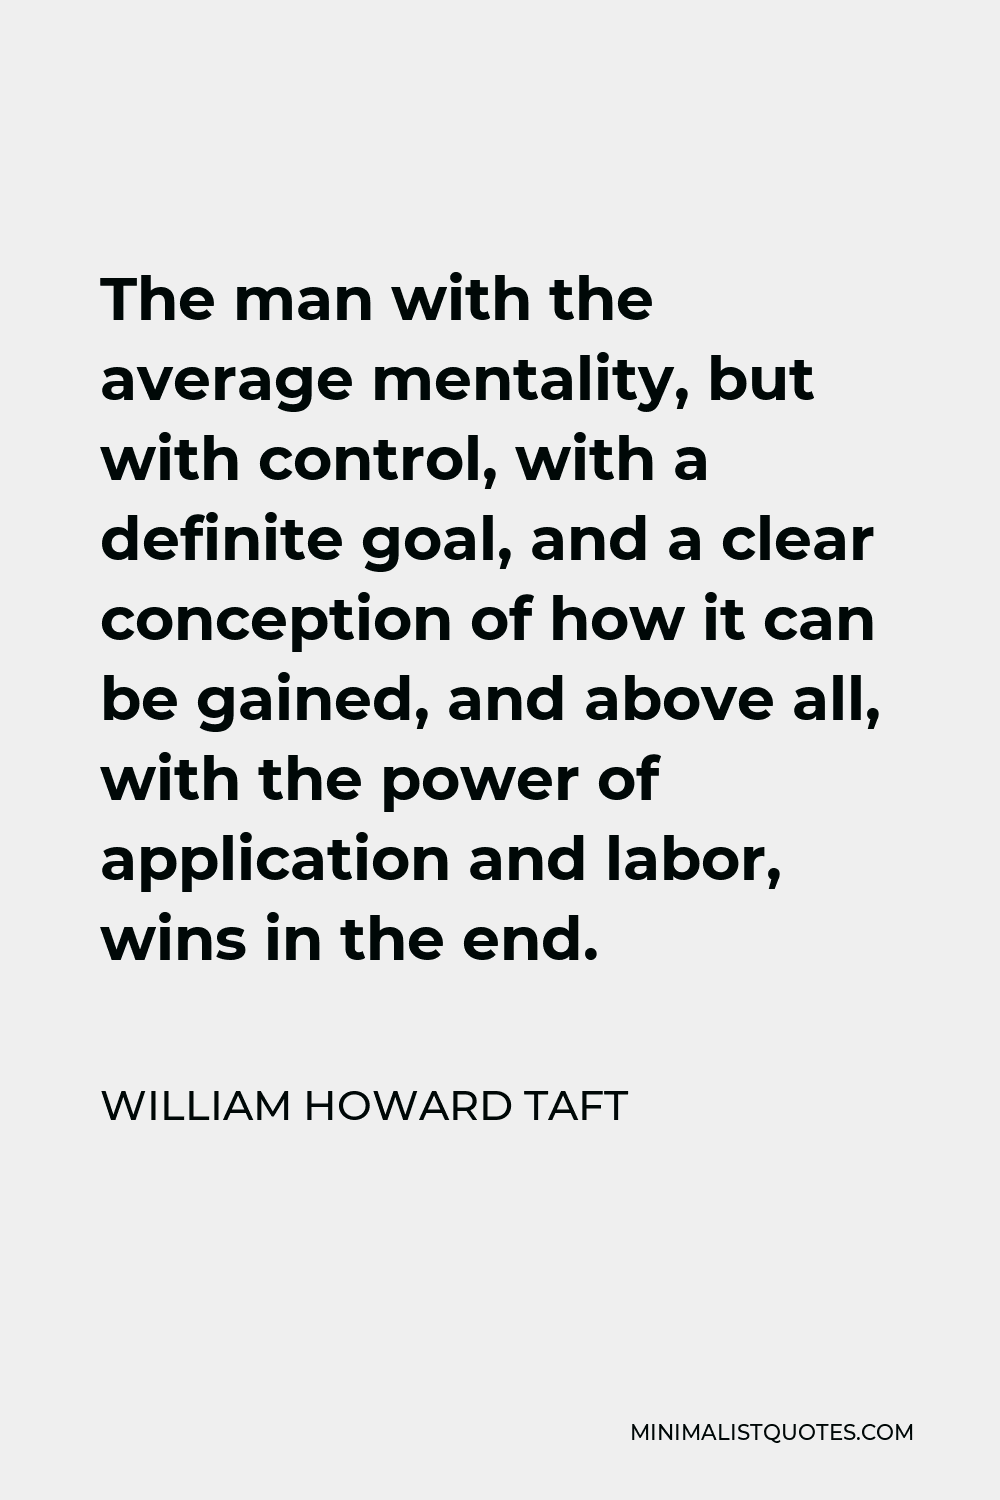 William Howard Taft Quote - The man with the average mentality, but with control, with a definite goal, and a clear conception of how it can be gained, and above all, with the power of application and labor, wins in the end.